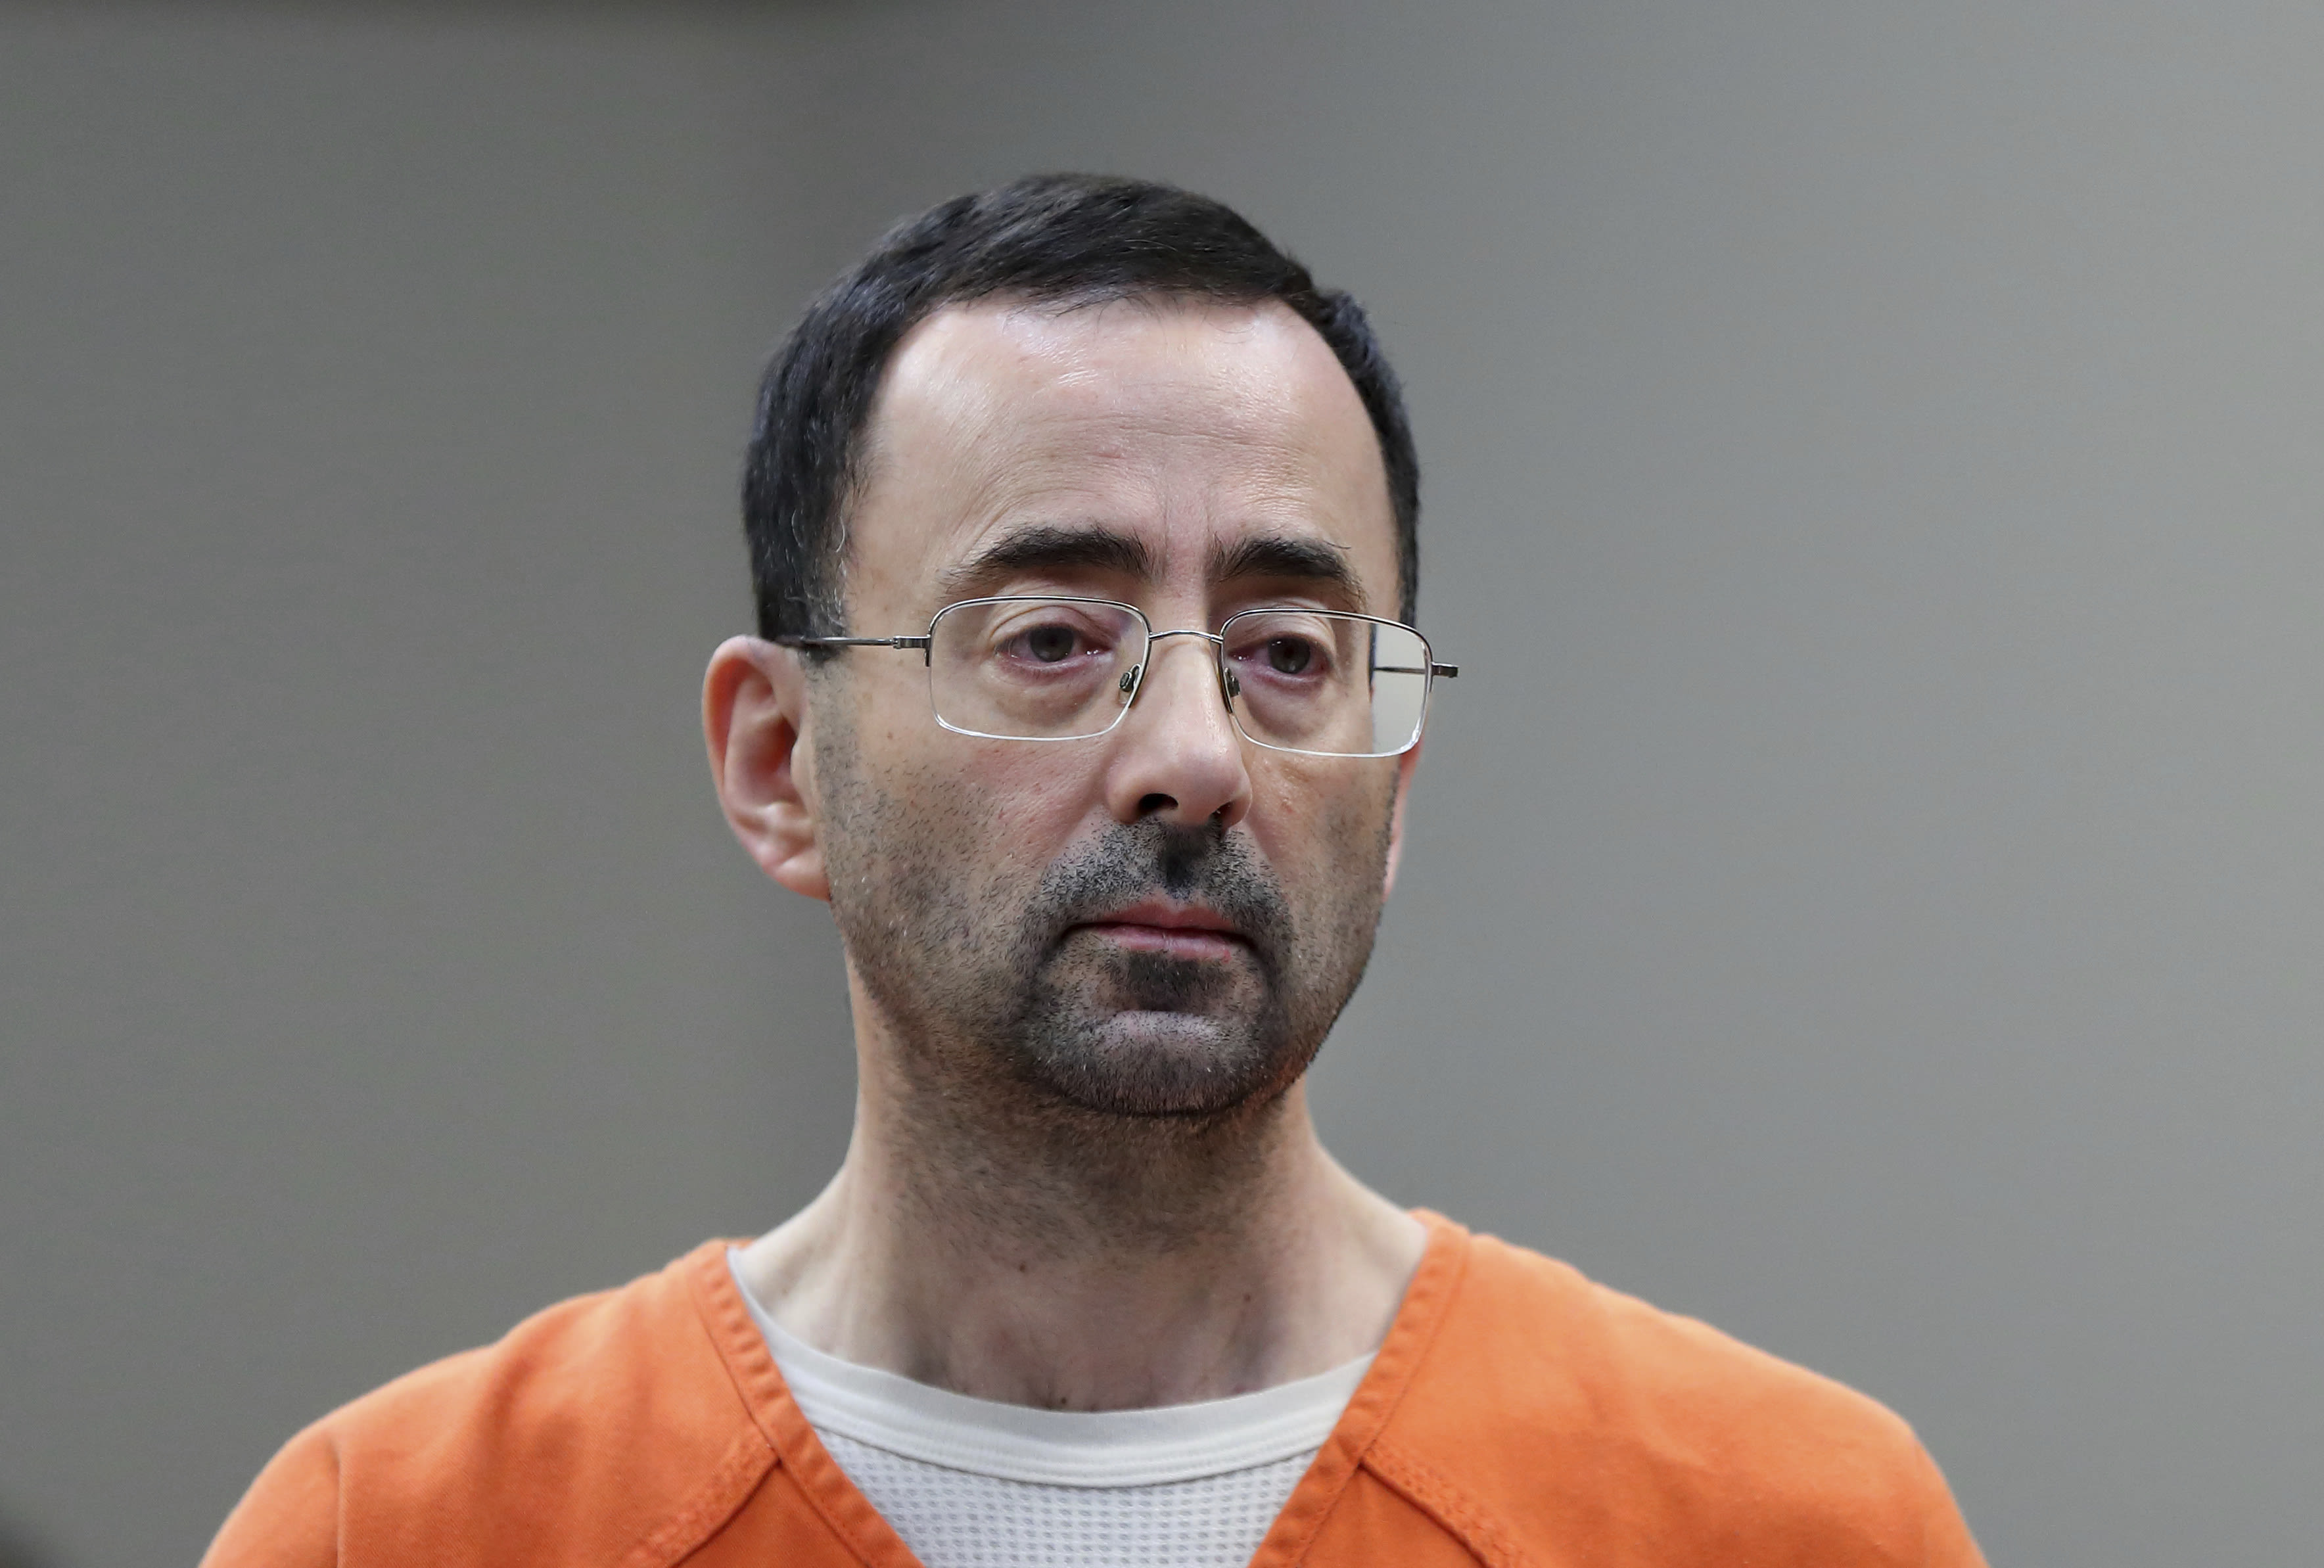 U.S. to pay victims $138.7 million for botching Larry Nassar sex assault investigation